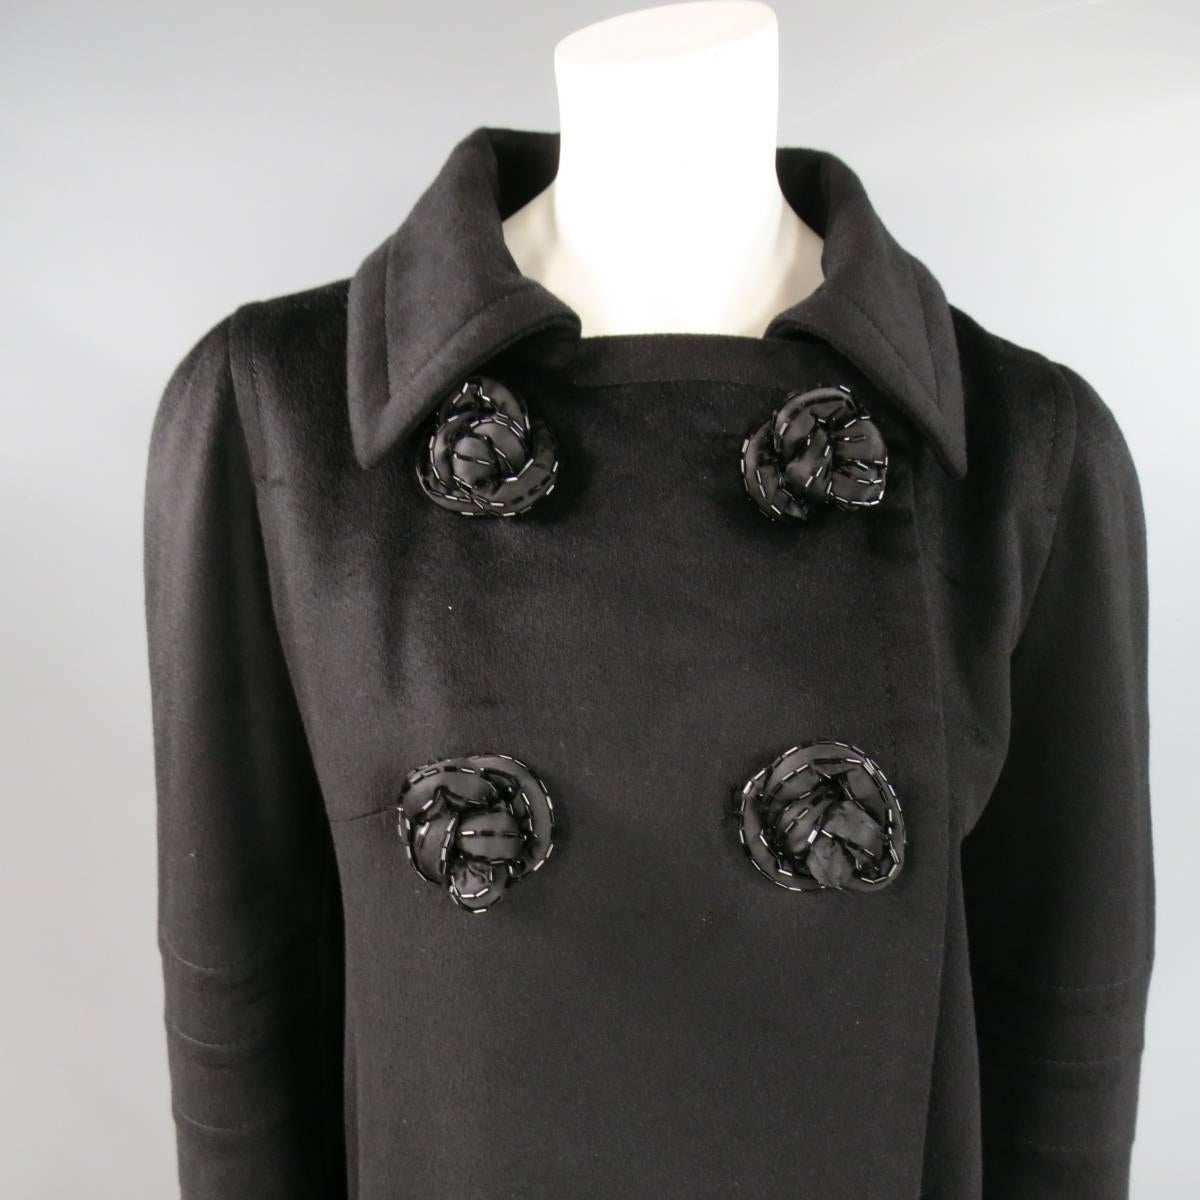 Fabulous JEAN-LOUIS SCHERRER coat in black cashmere blend fabric with a wide, pointed collar, double patch pockets, double breasted two snap closure at top, pleated back, and beaded rose apliques. Made in France.
 
Good Pre-Owned Condition.
